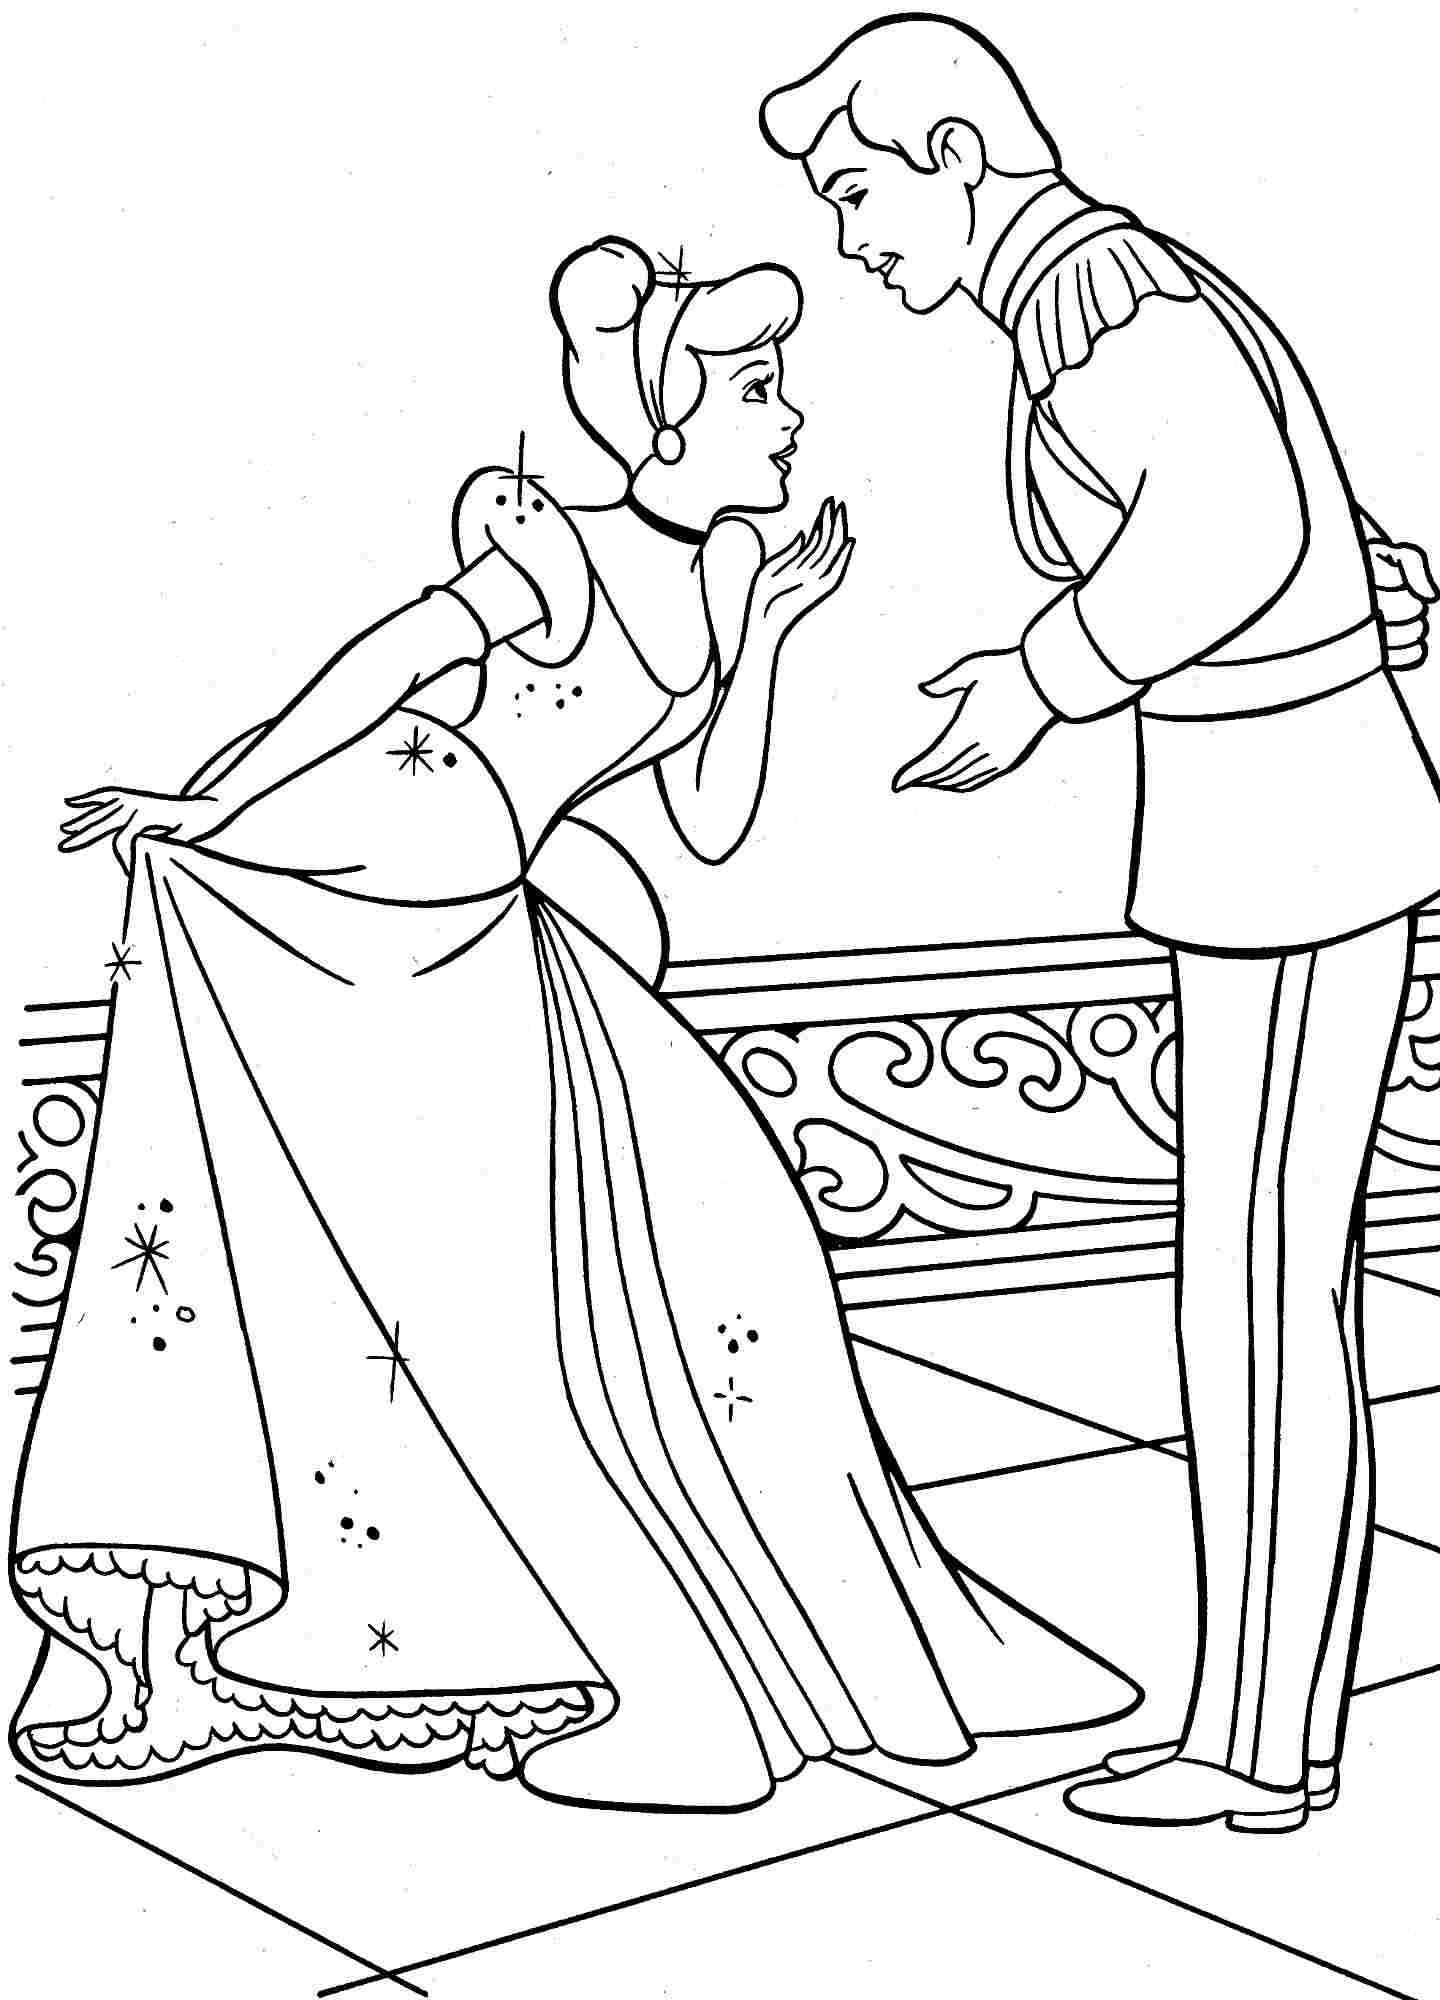 Disney Colouring Pages Cinderella - High Quality Coloring Pages